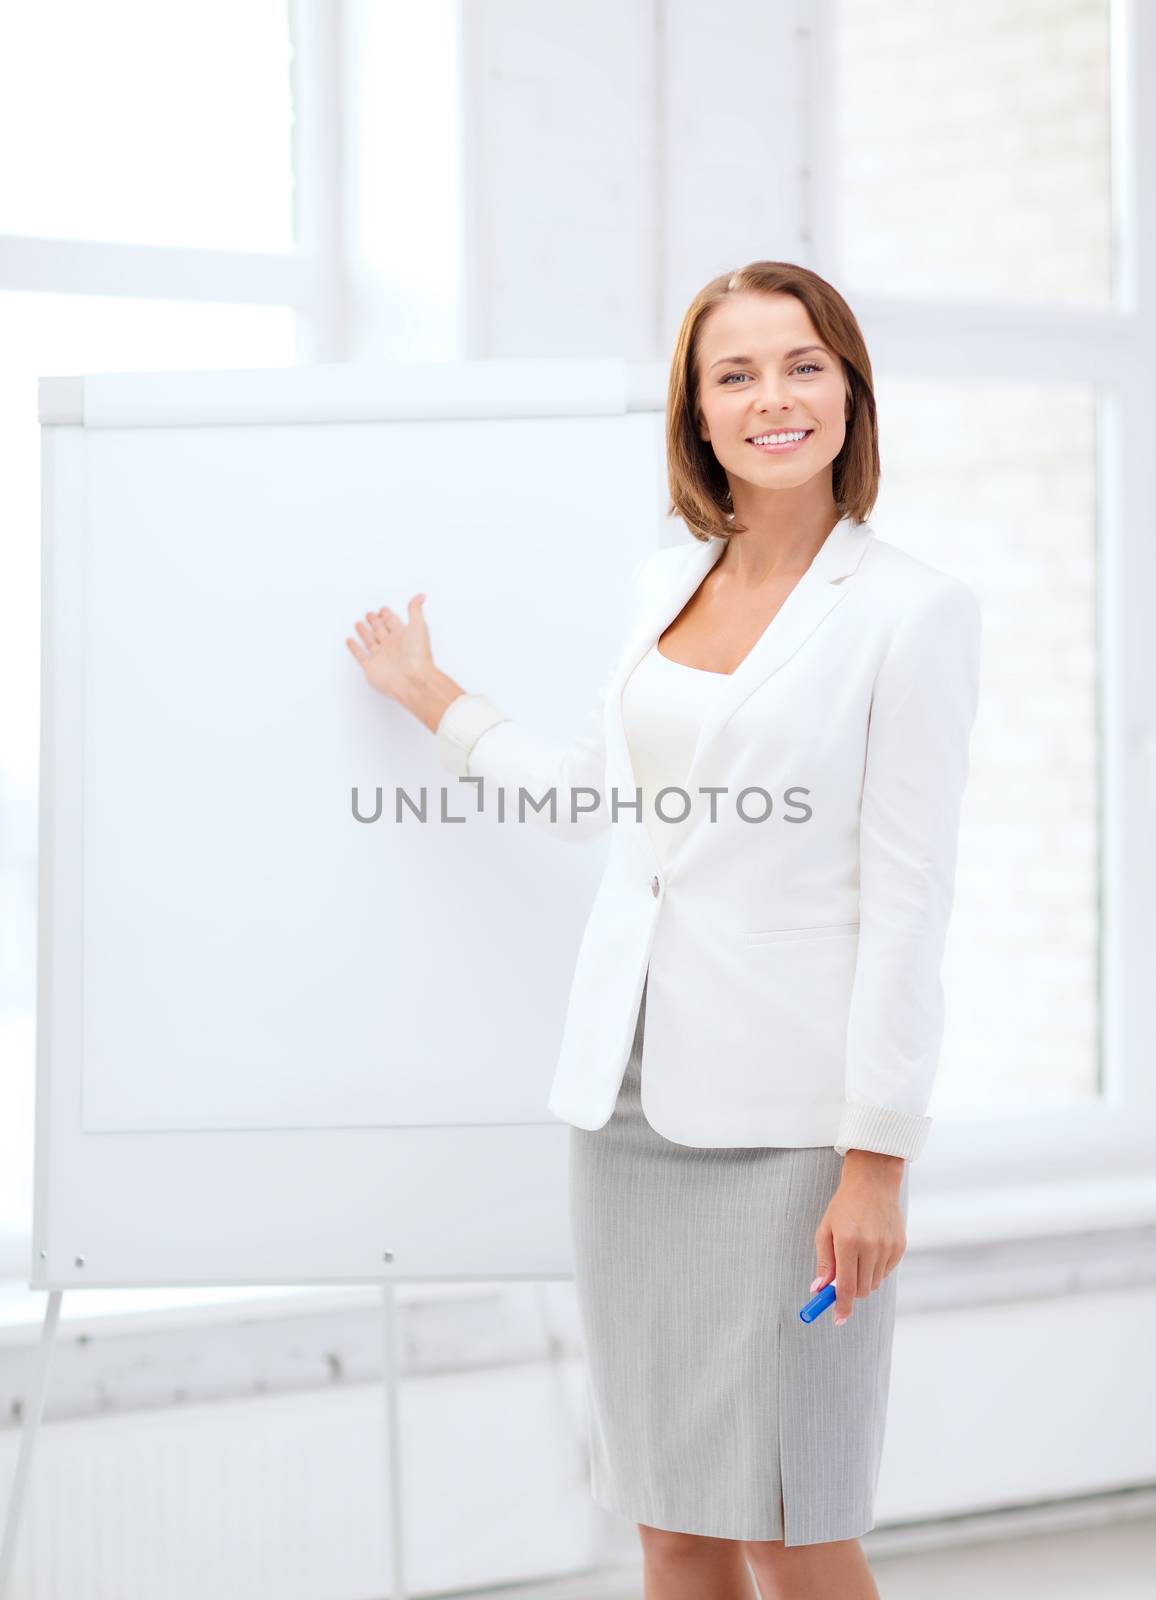 business and education concept - smiling businesswoman showing flipchart